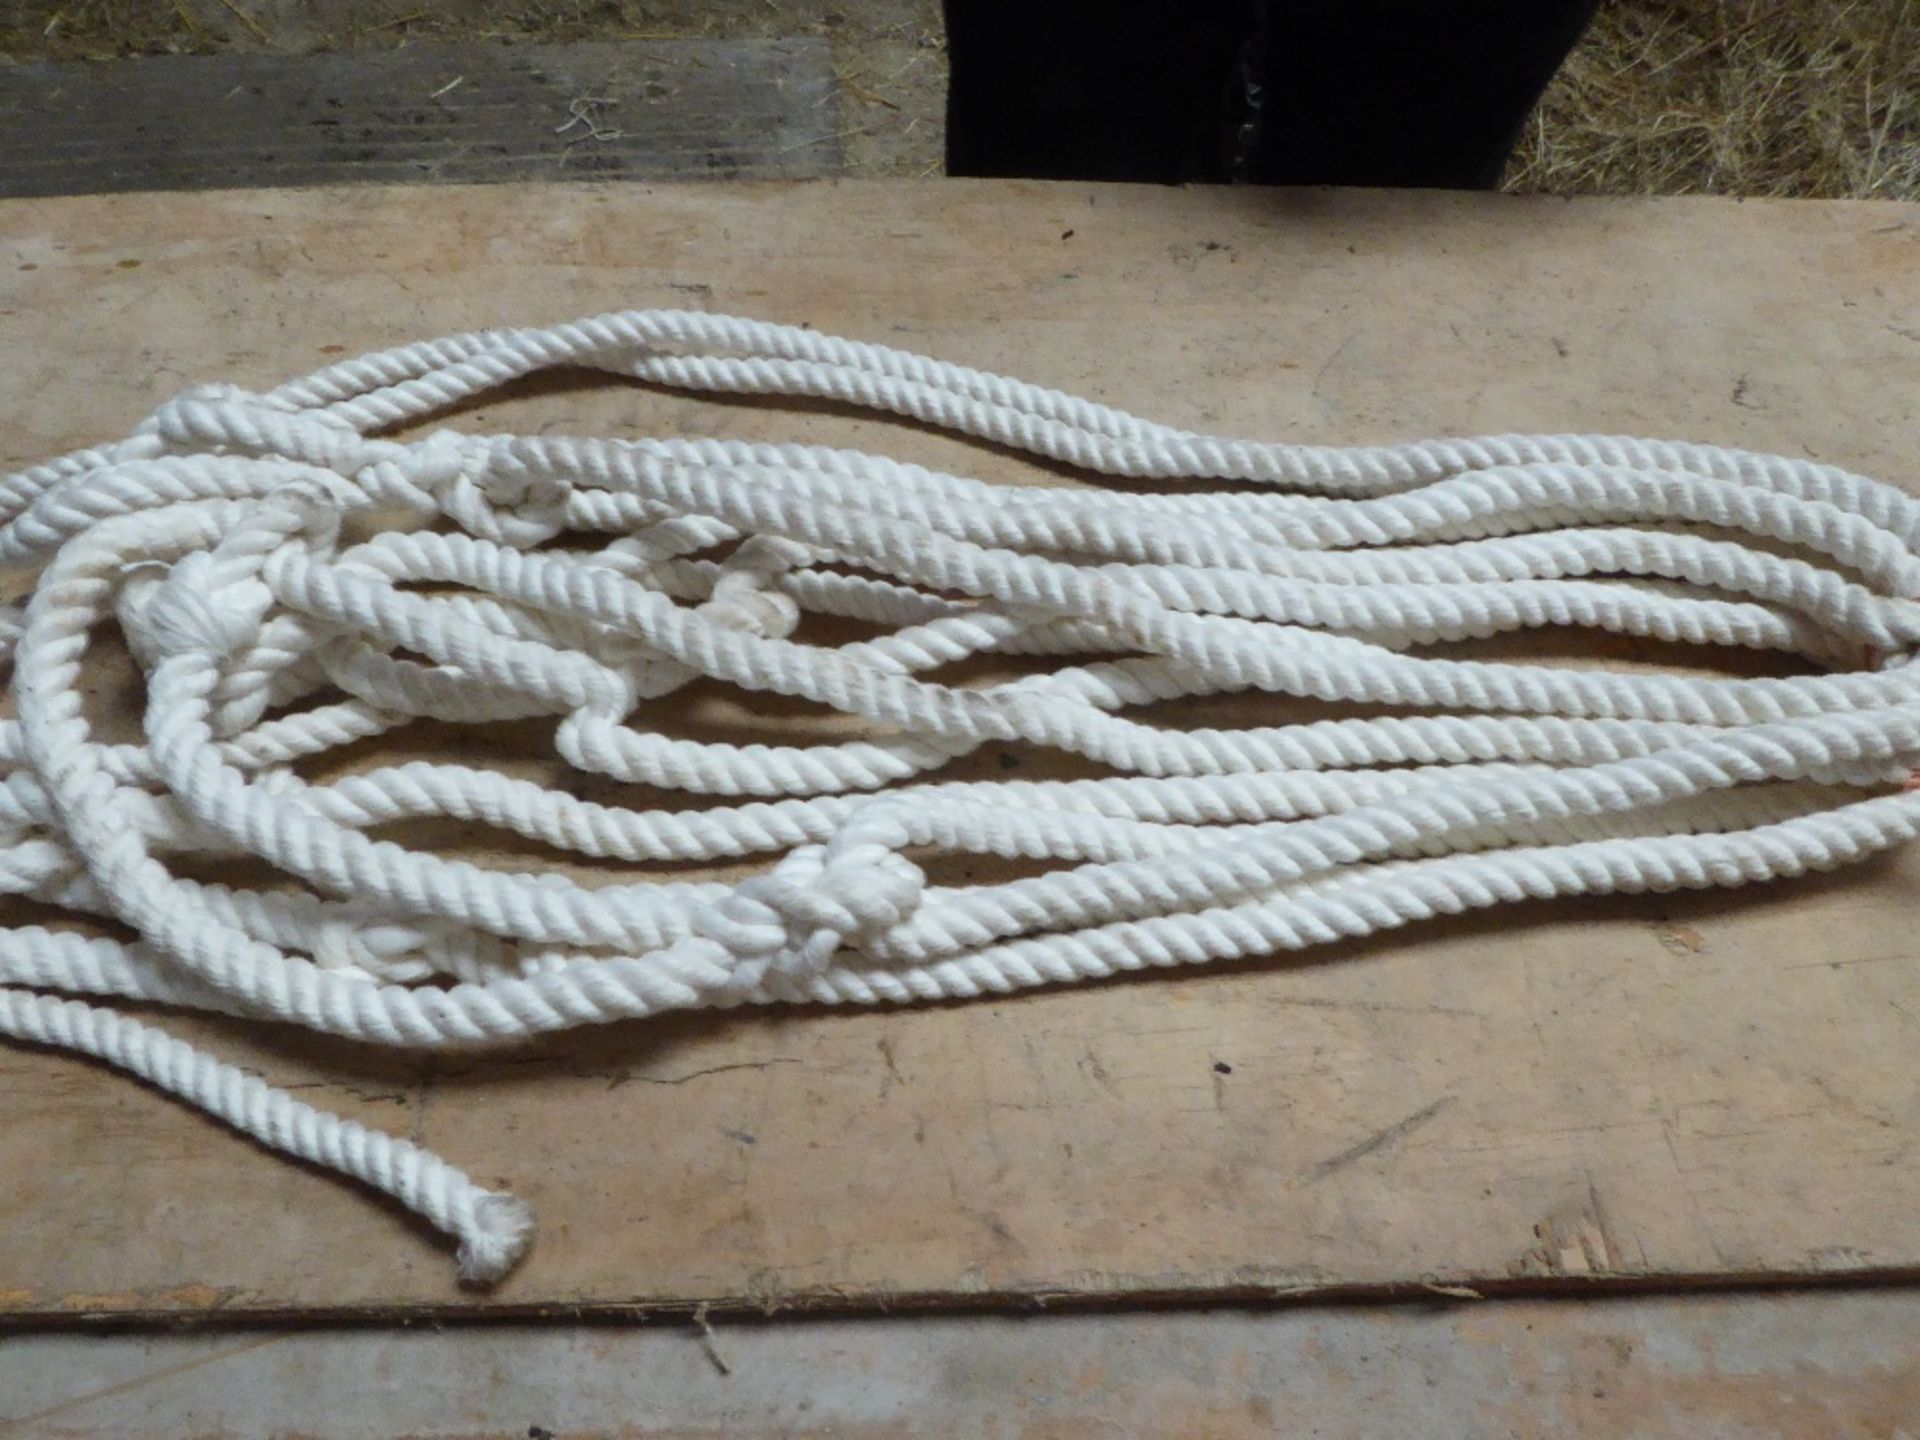 Four white rope halters